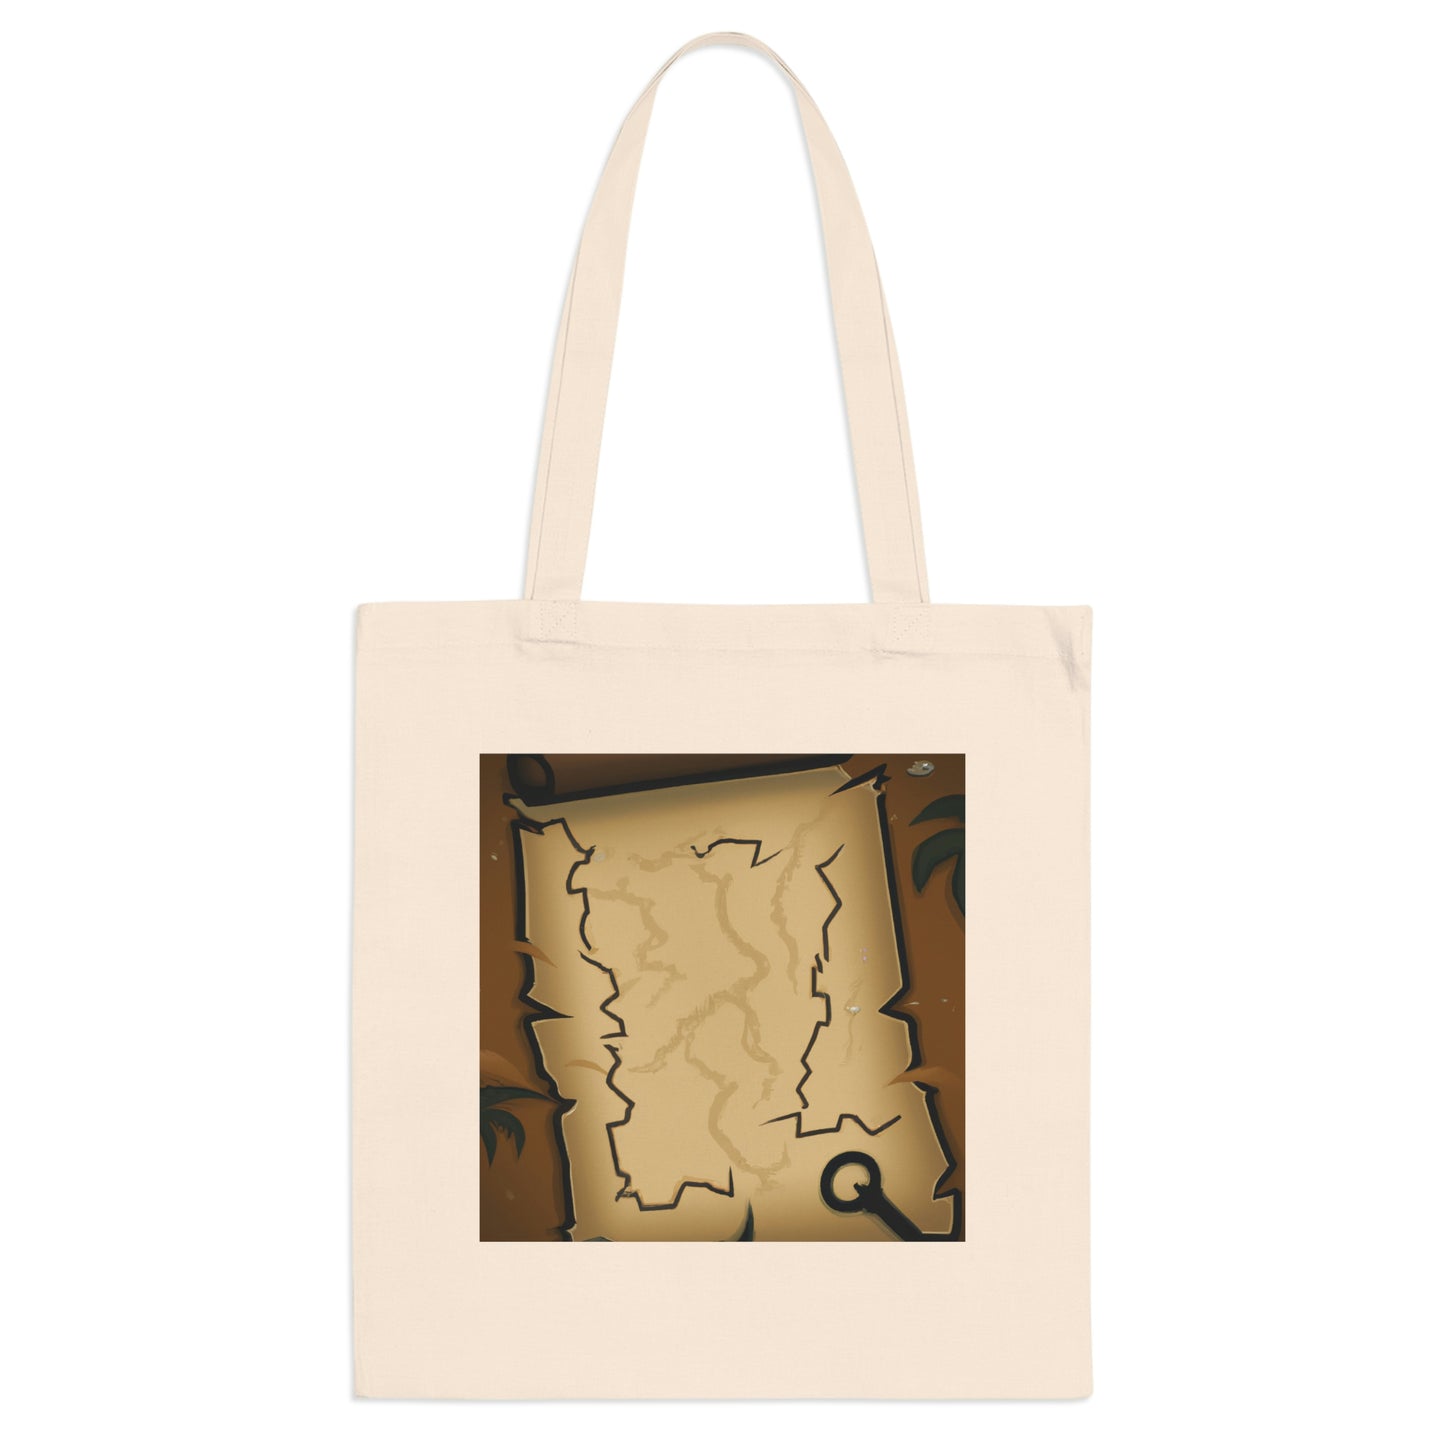 "The Mysterious Map of Buried Treasures" - The Alien Tote Bag